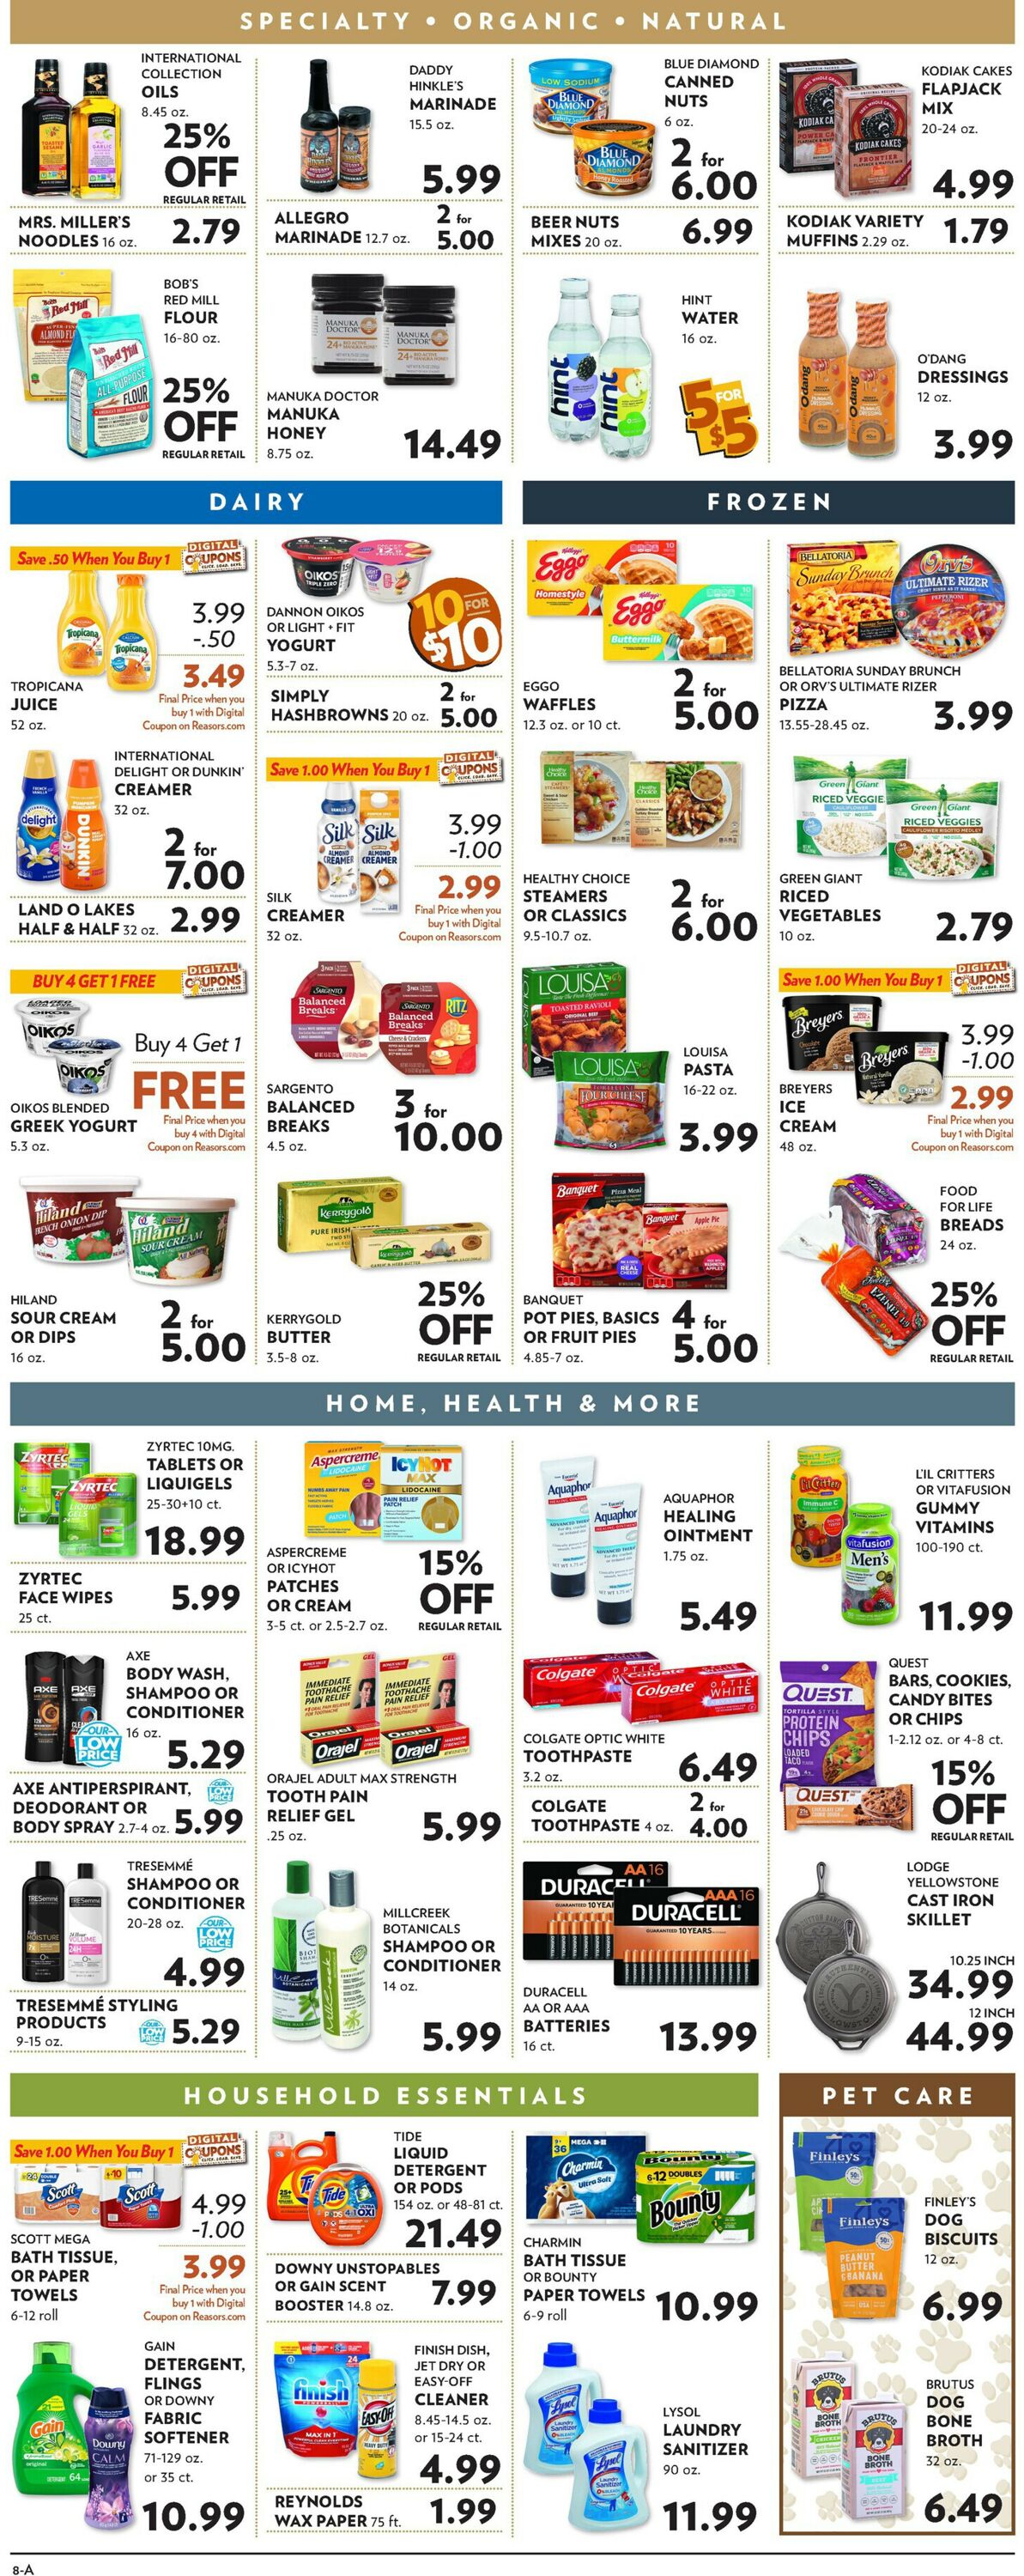 Reasor's Ad from 11/02/2022